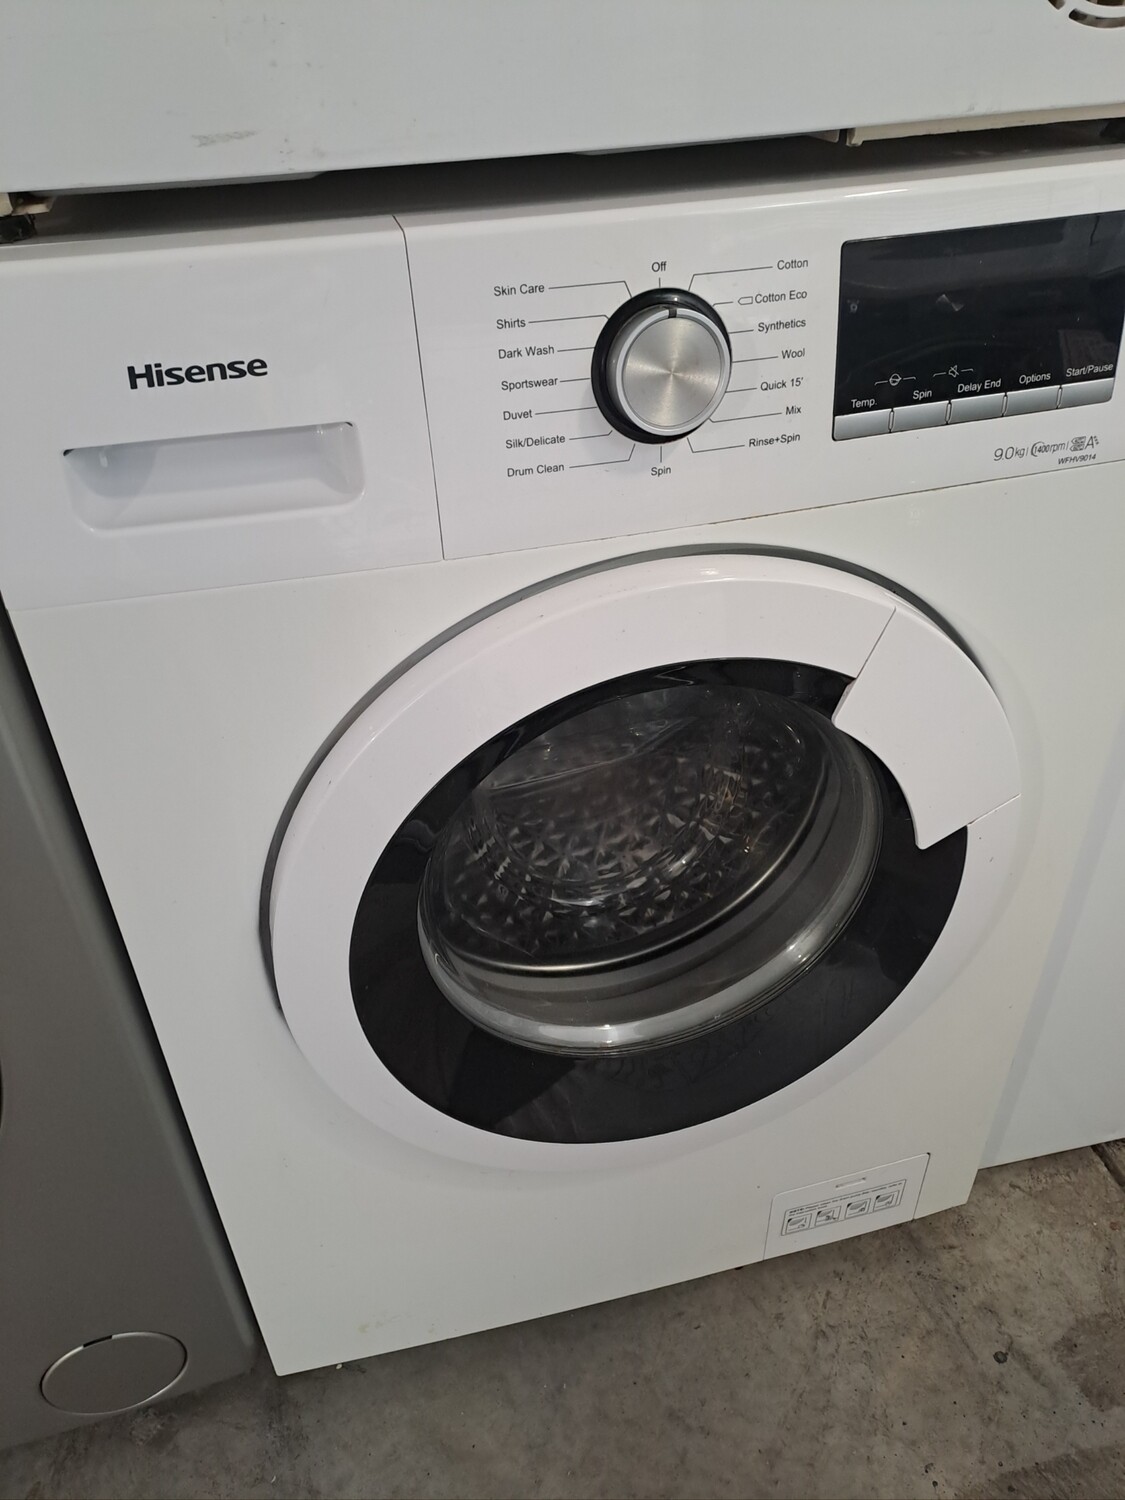 Hisense WFHV9014 9kg Load, A+++ 1400 Spin Washing Machine - White - Refurbished - 6 Month Guarantee. This item is located at our Whitby Road Shop